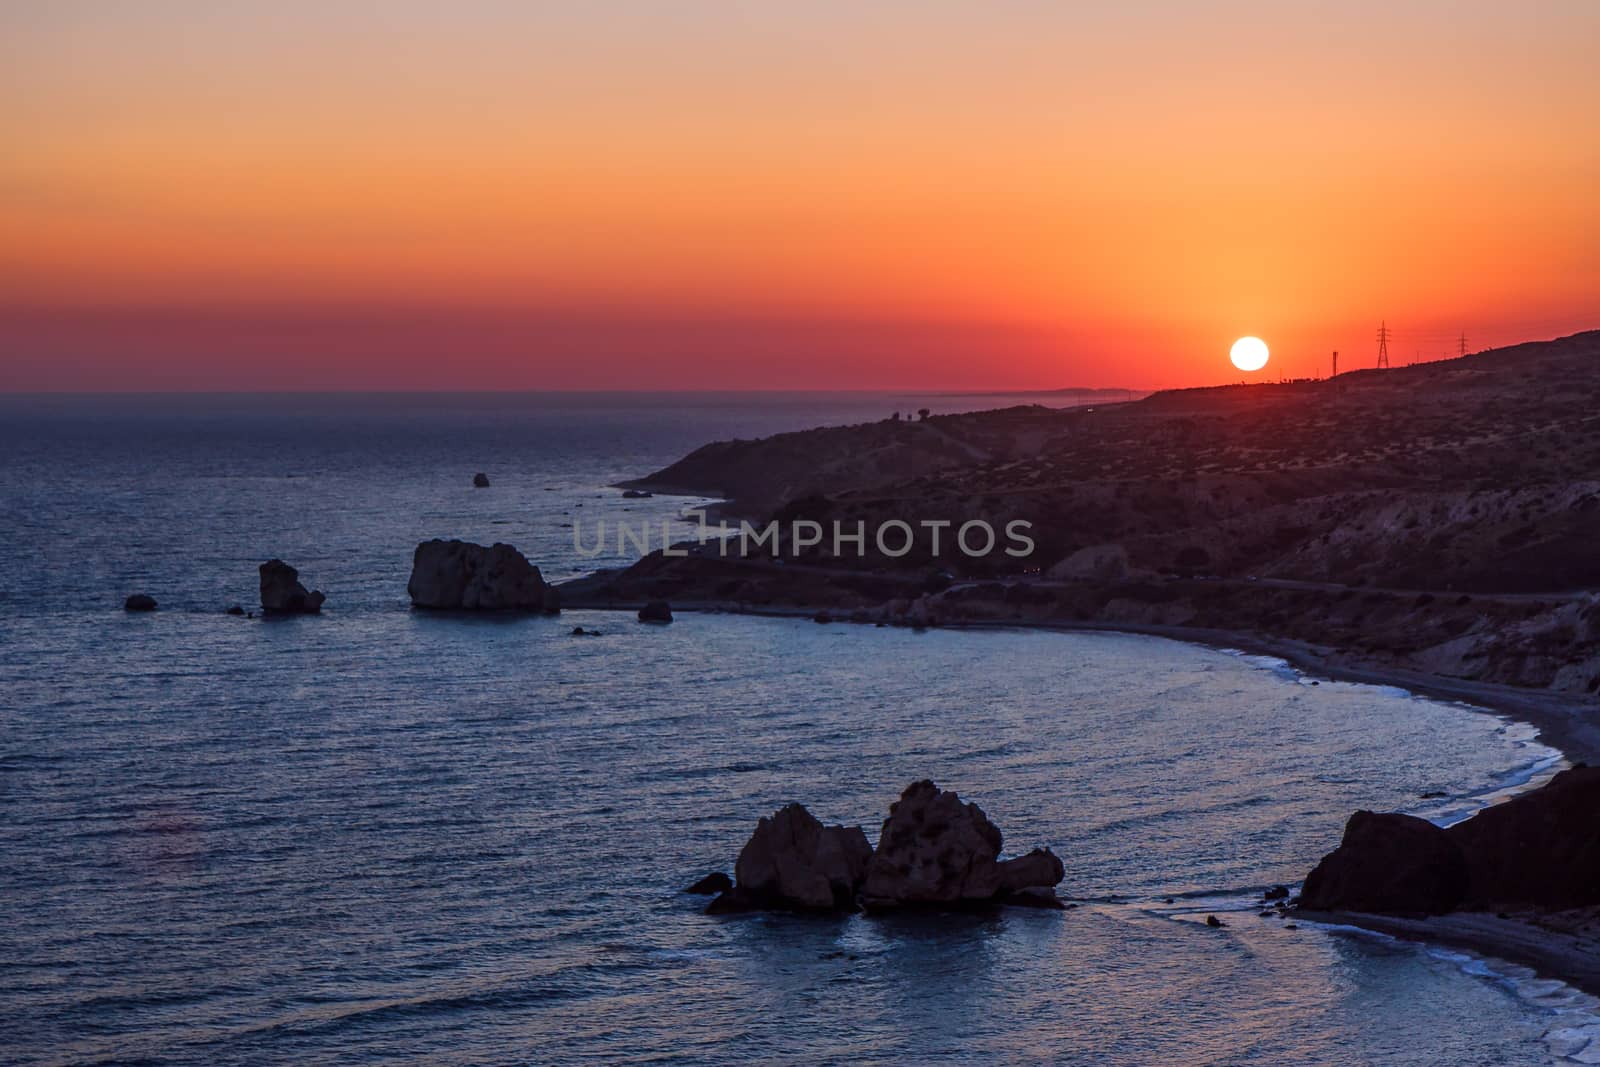 Sunset over Aphrodite's Rock